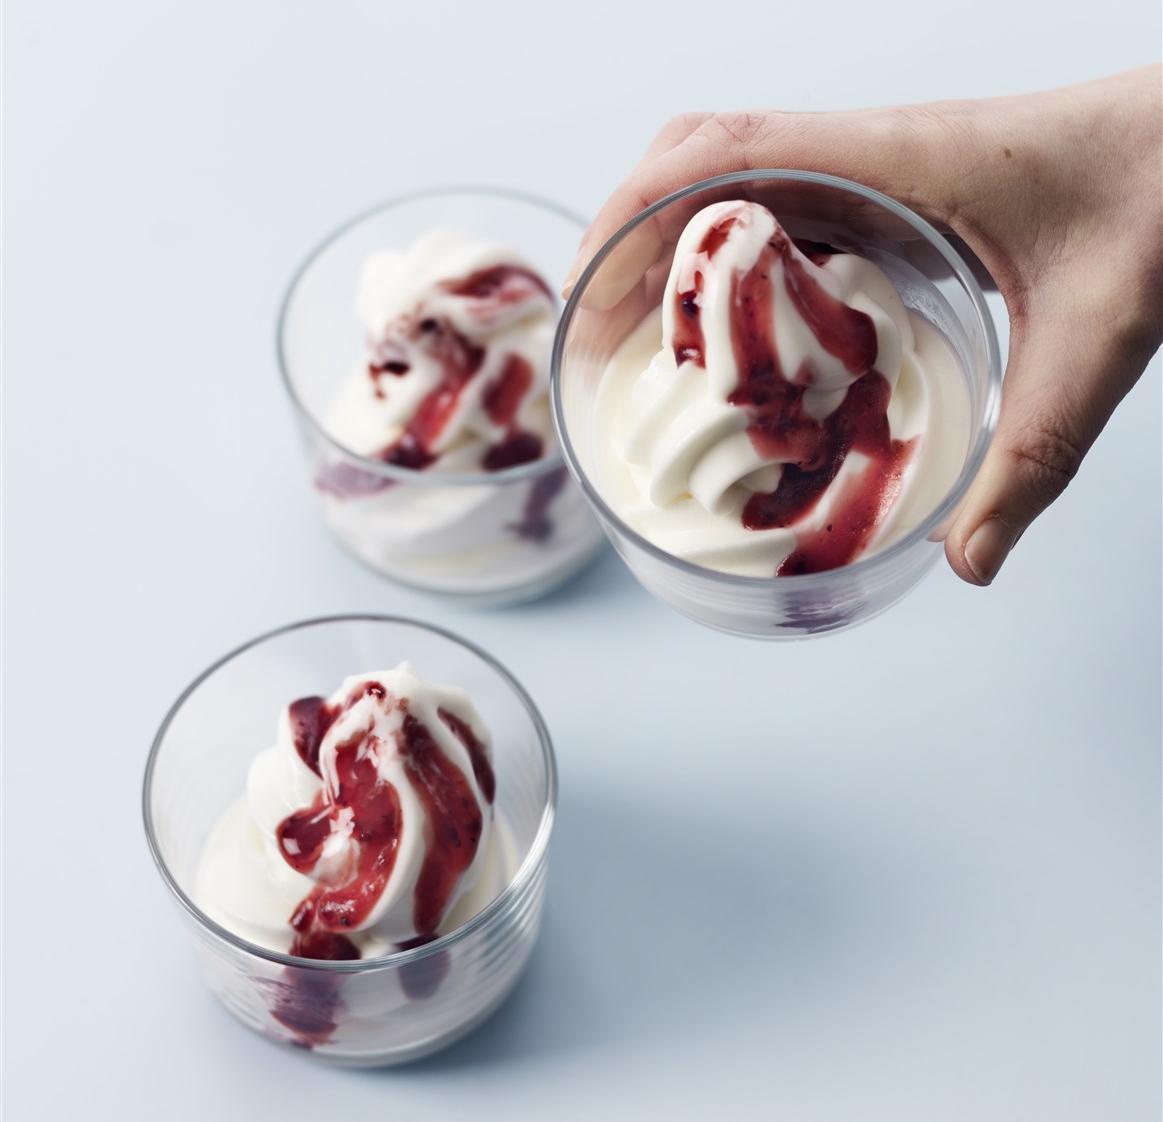 Can Now Get Frozen Yoghurt From IKEA For Less Than RM2 Per Cup